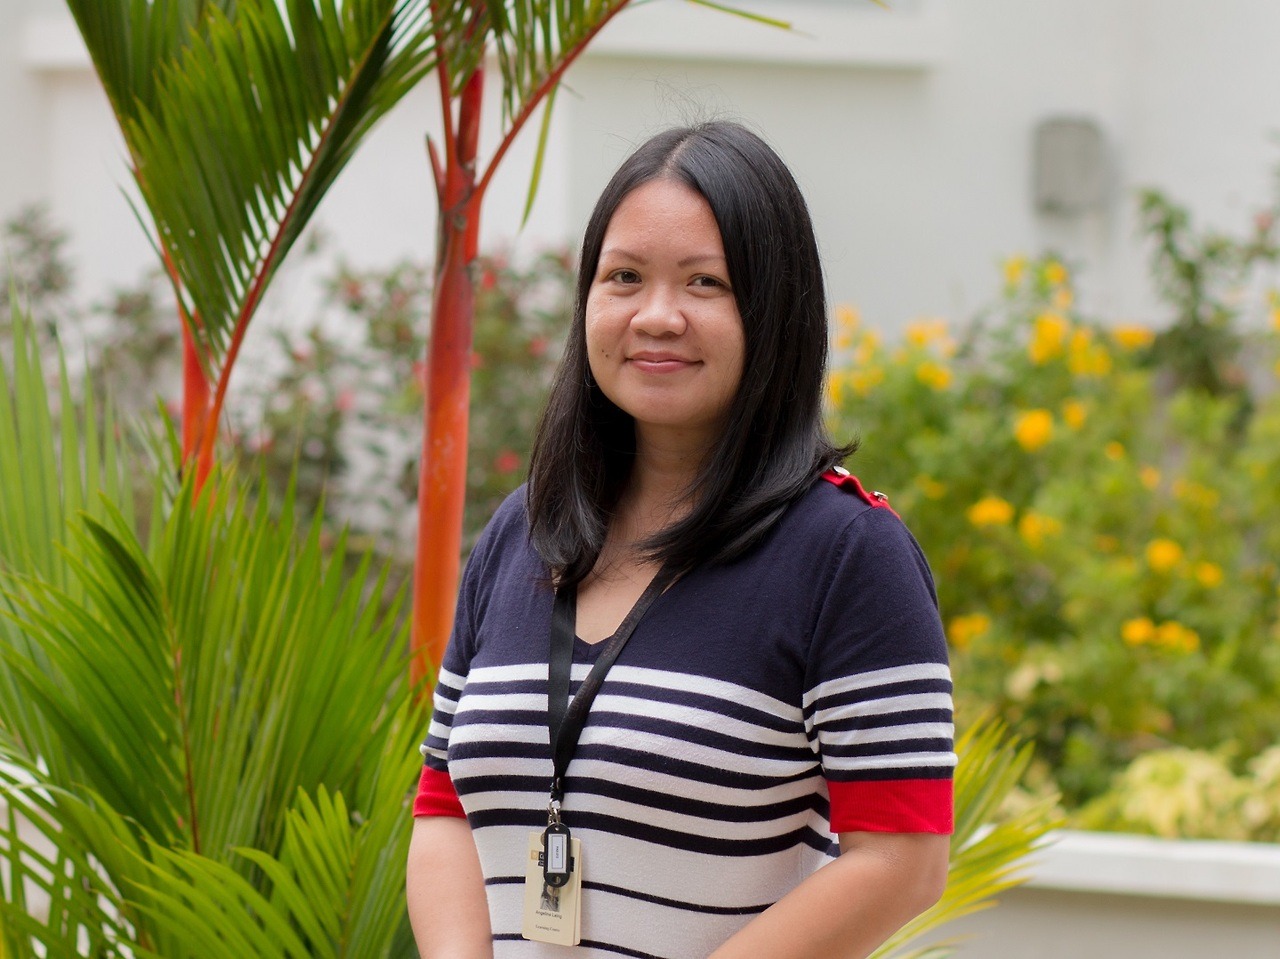 “Apart from teaching at Curtin Malaysia, I have discovered scuba diving. Curtin Malaysia provided me a platform to establish Curtin Dive Club Malaysia along with fellow divers Dr. Stephanie Chan and PhD student Lim Wee Teck, who are also members of...